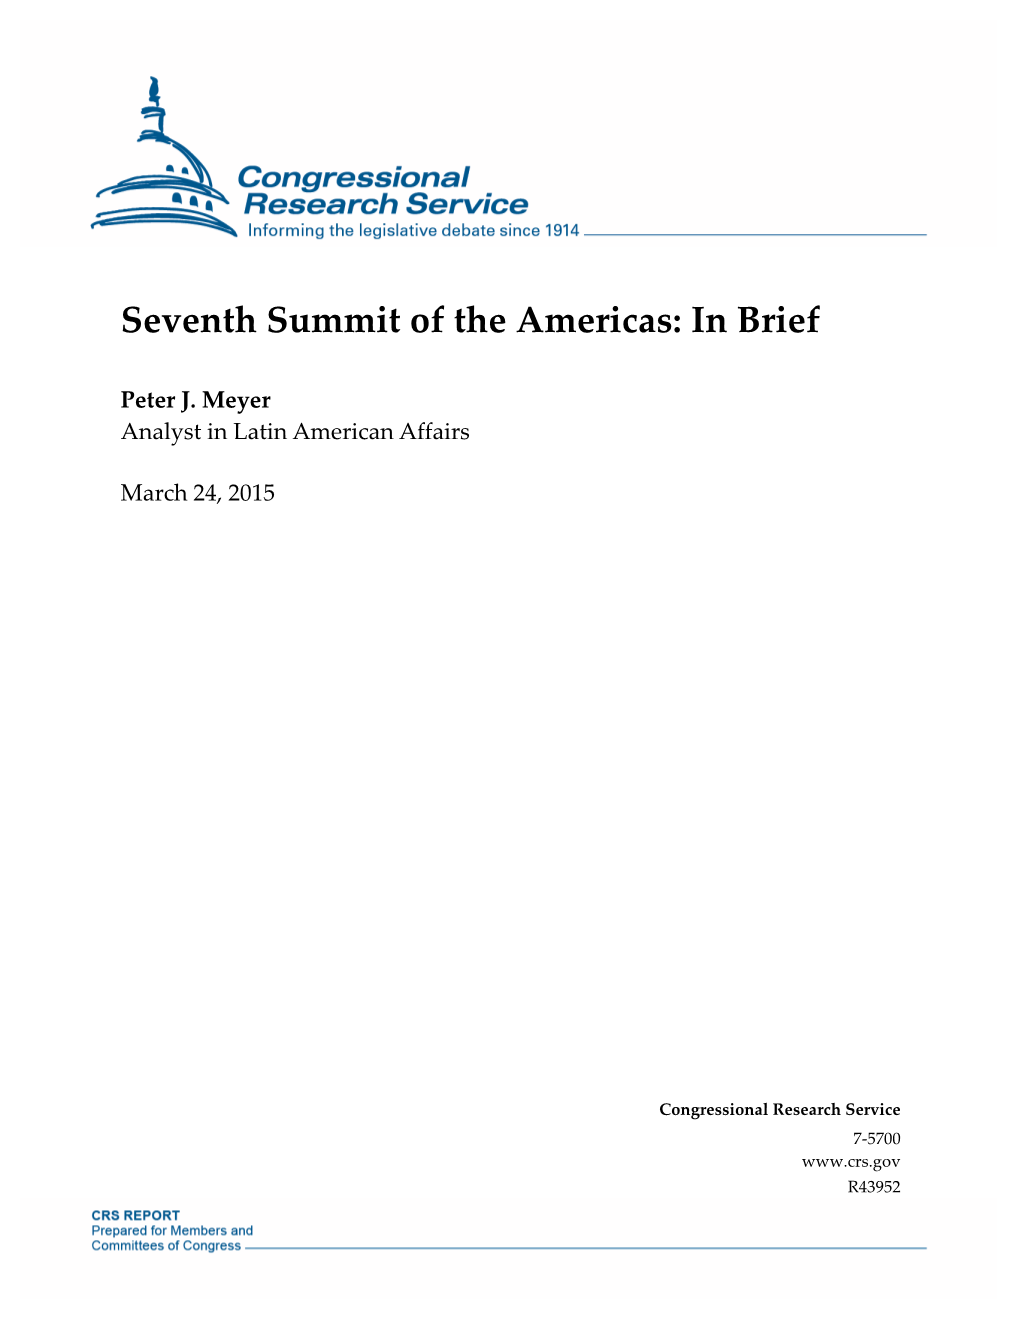 Seventh Summit of the Americas: in Brief